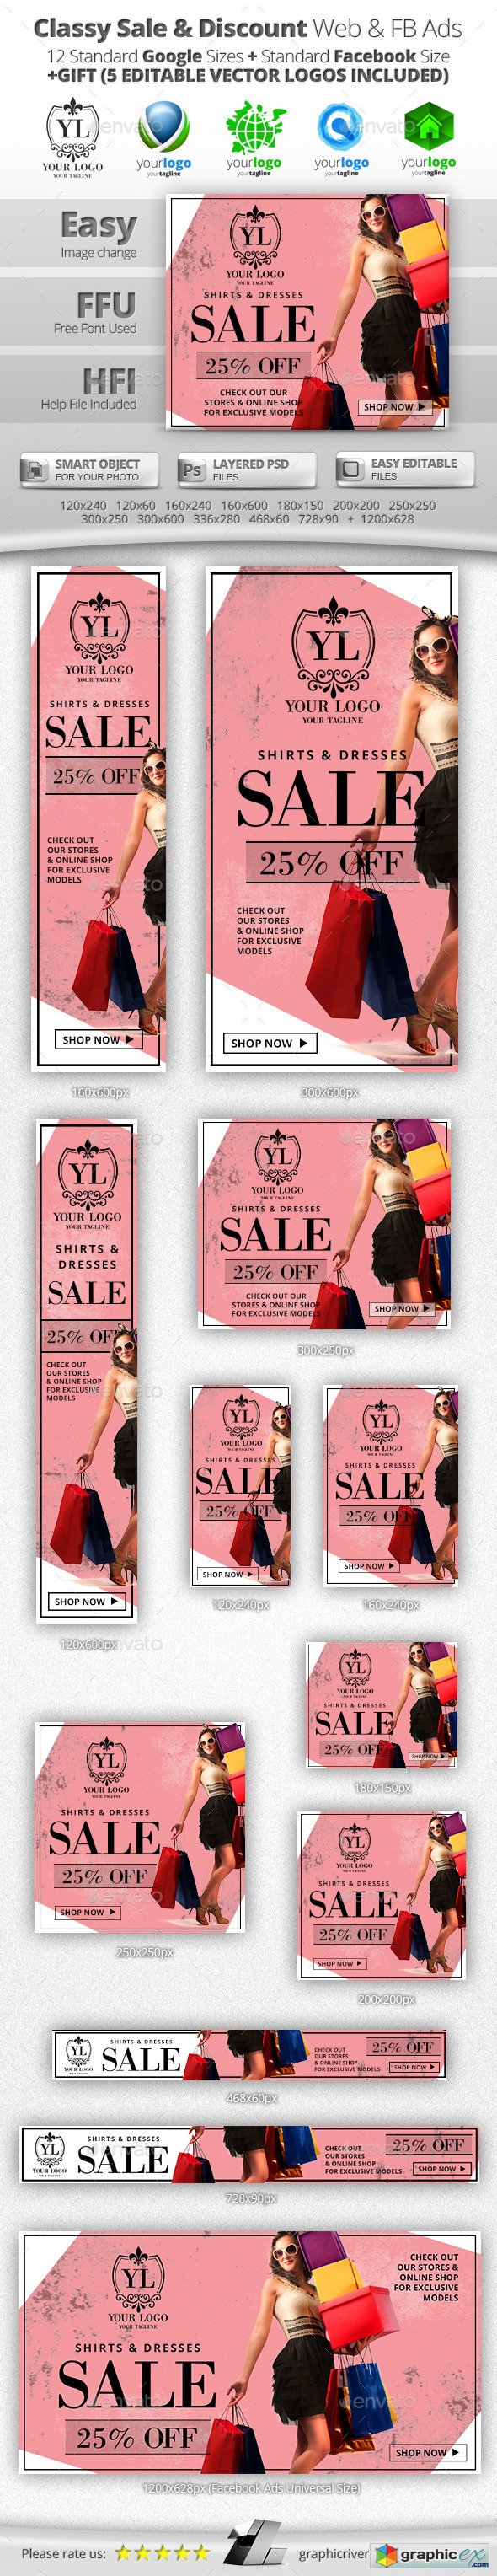 Classy Sale & Discount Web & Facebook Banners